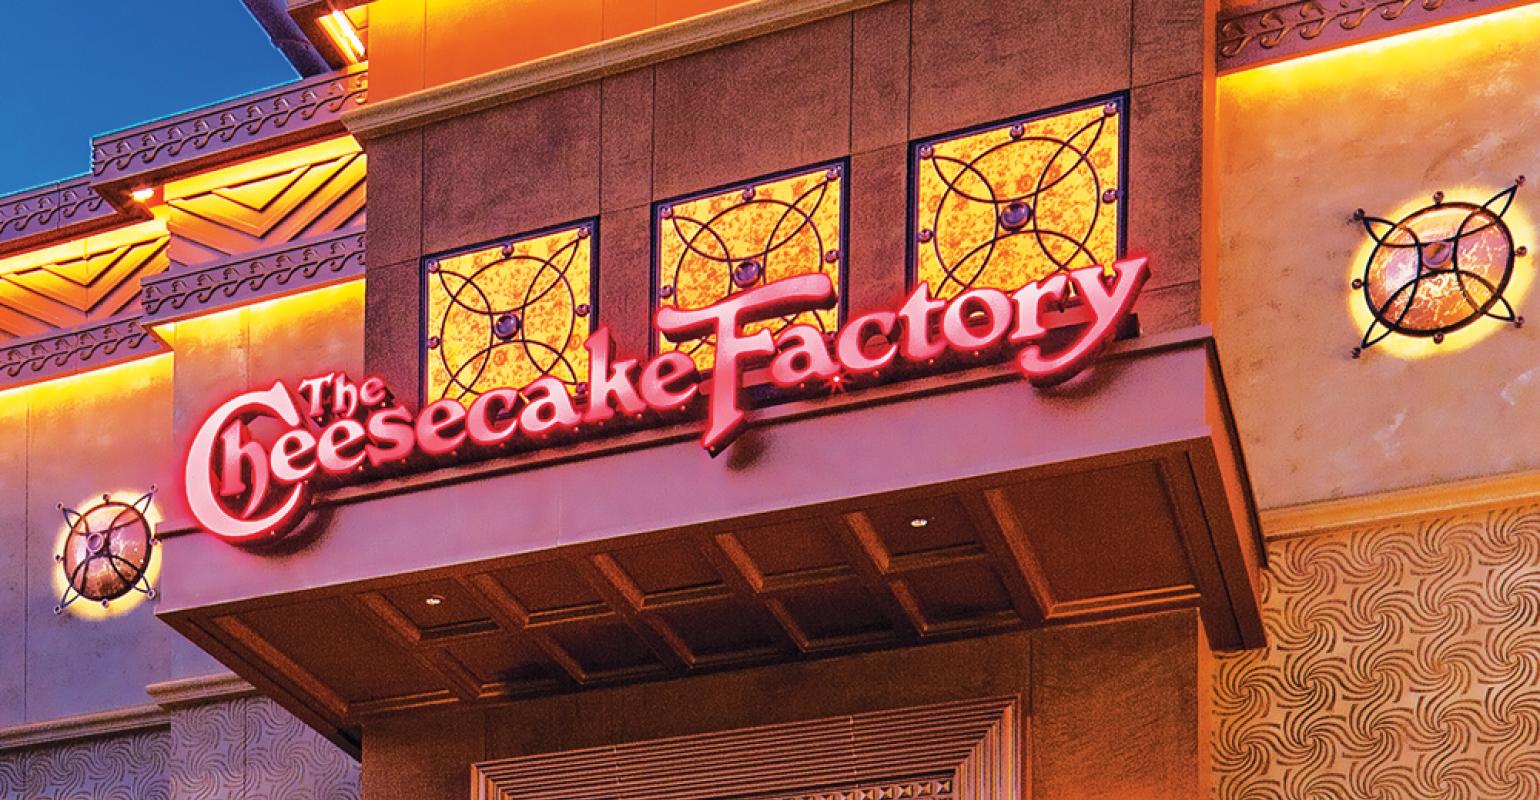 The Cheesecake Factory Leans into Development and Growth for Sales